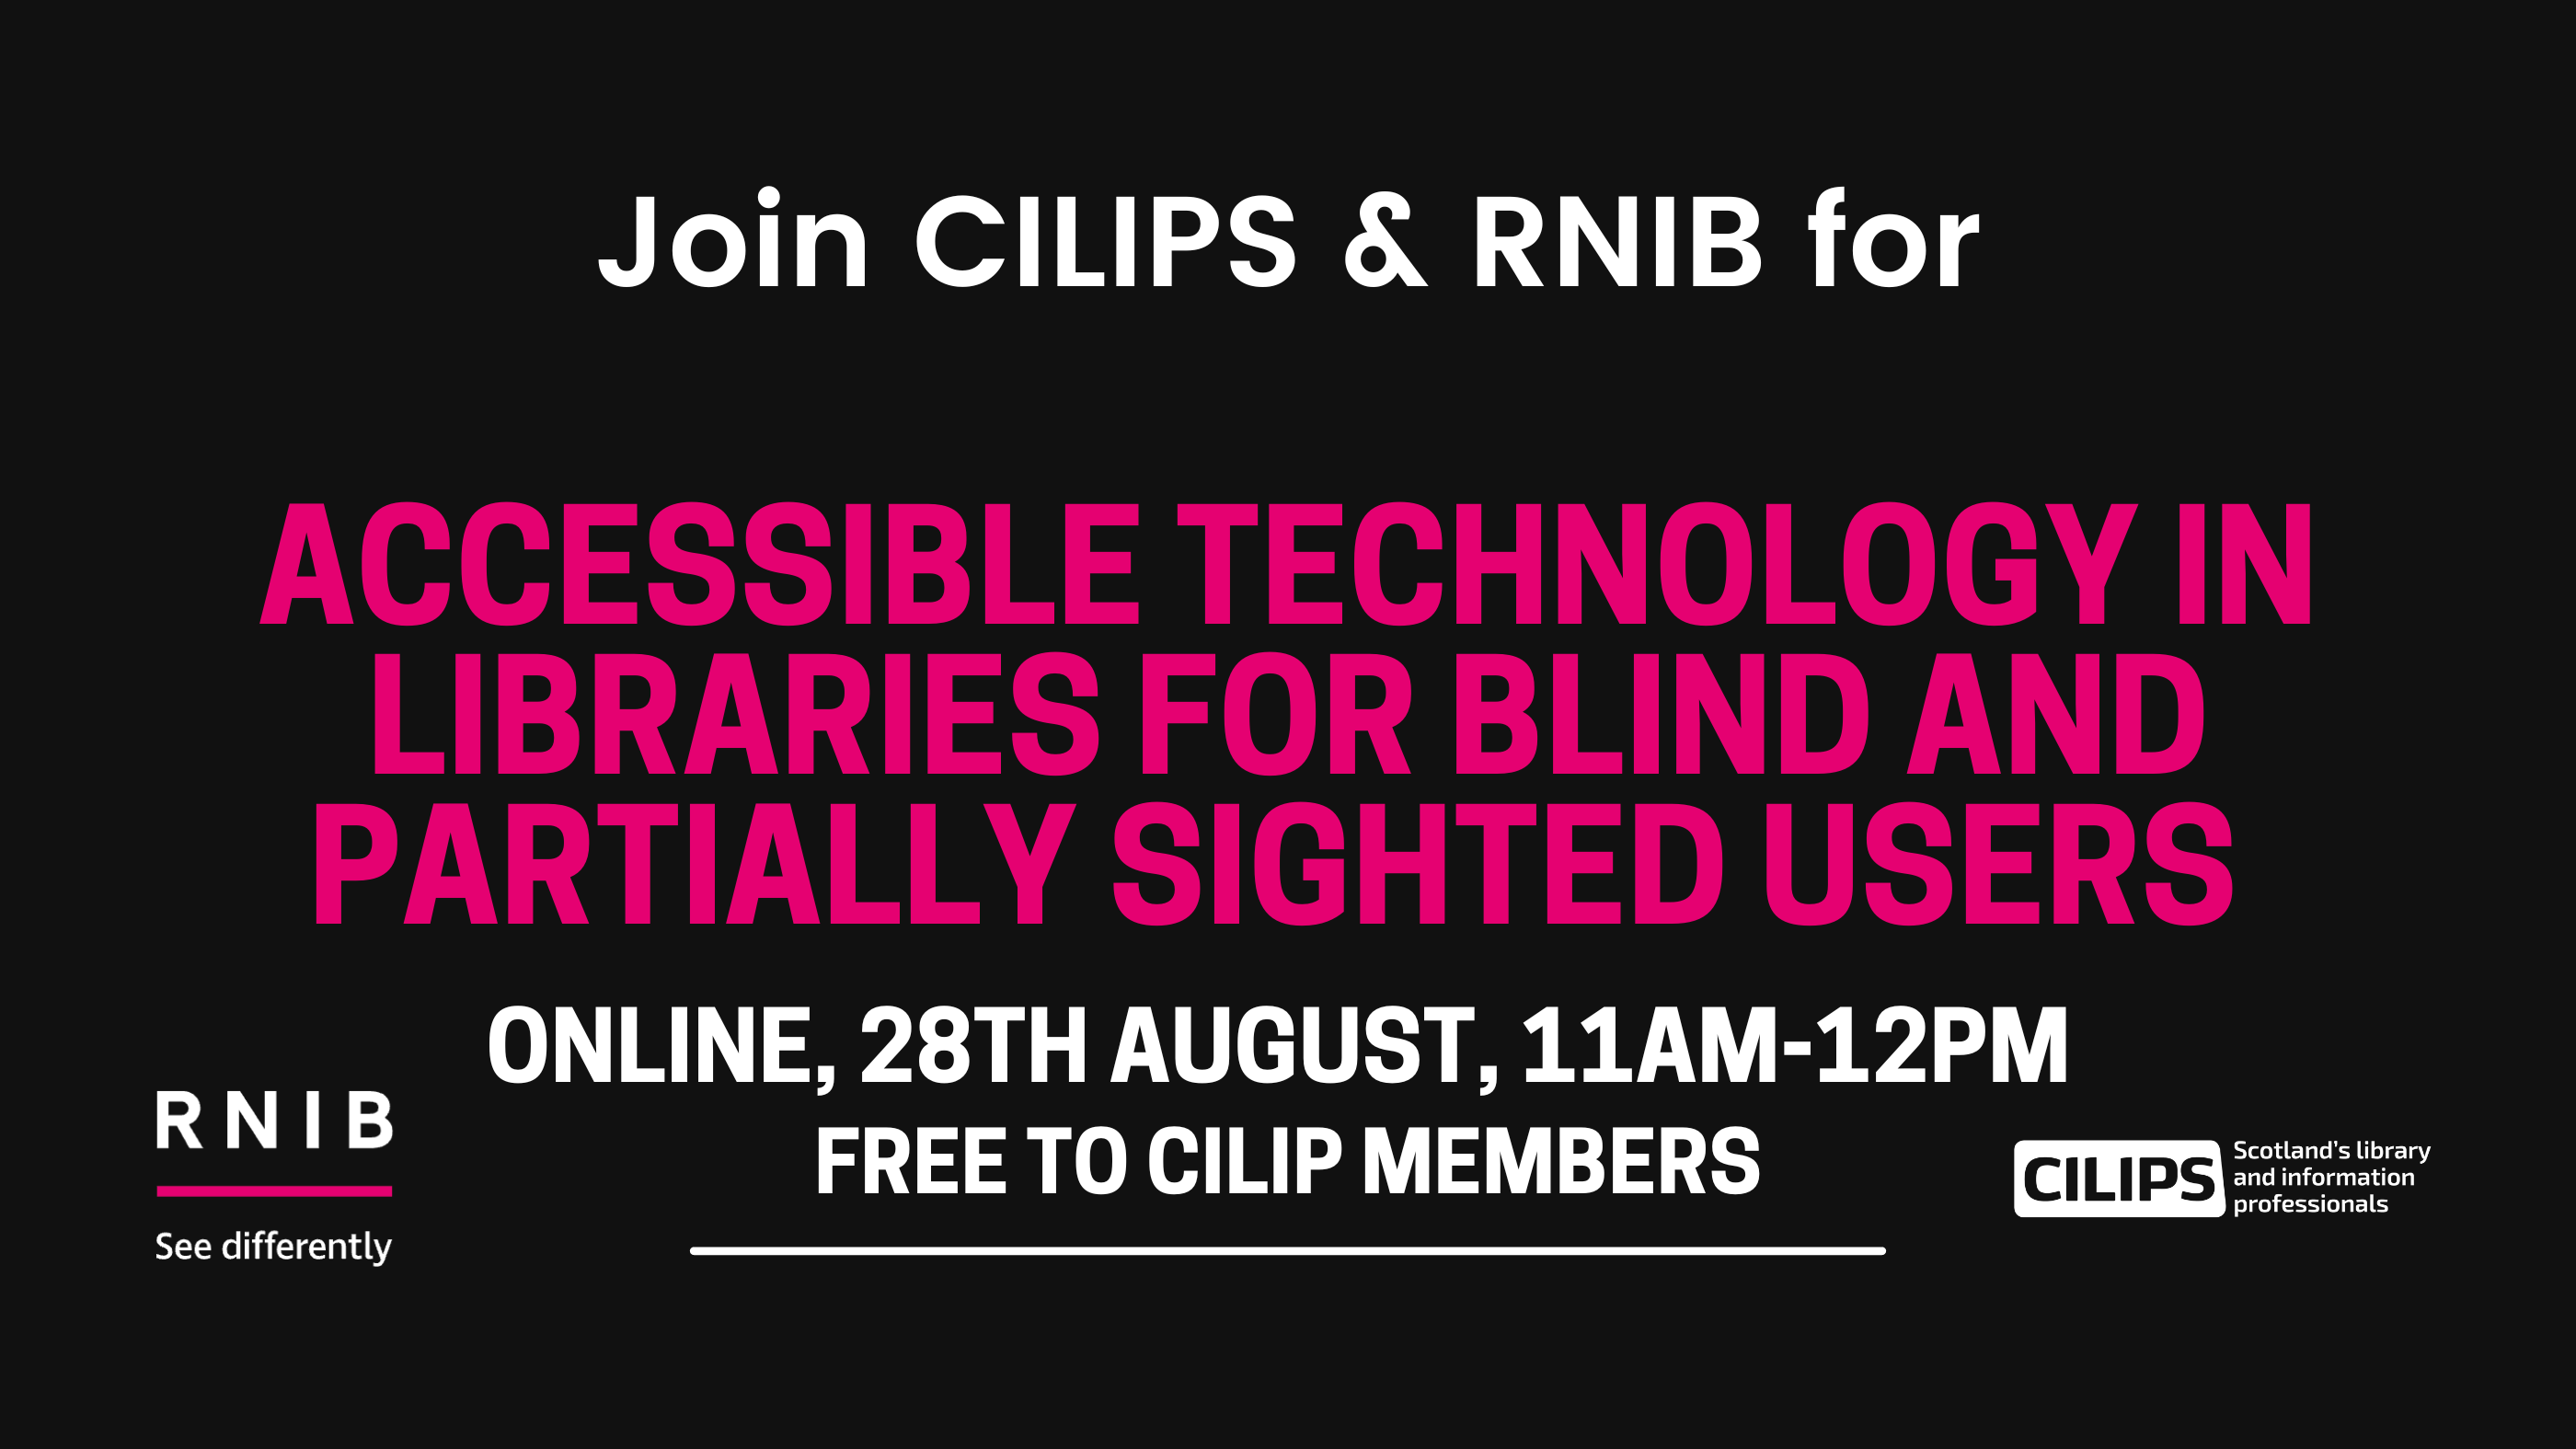 In white text, "Join CILIPS and RNIB for," and text continues in Pink, "Accessible Technology in Libraries for blind and partially sighted users." Text continues in white, Online, 28th of August, 11am-12pm, free to CILIP Members. RNIB and CILIPS logos on the bottom.